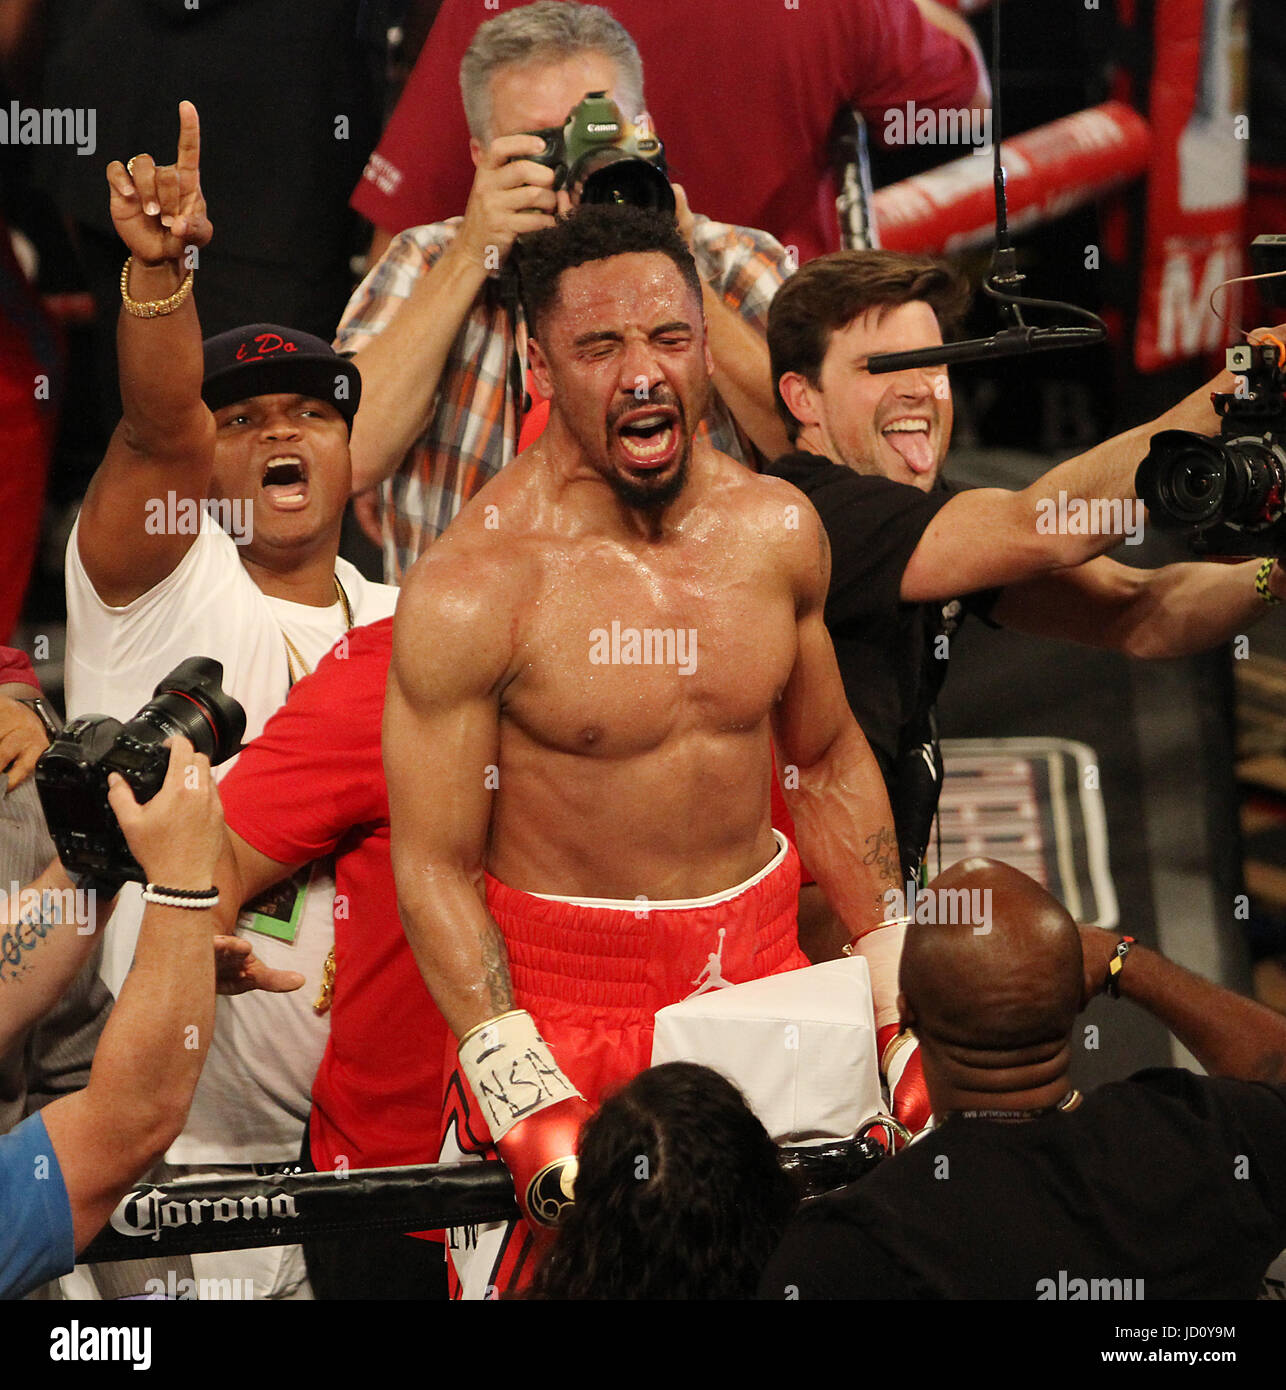 Las Vegas, Nevada, USA. June, 2017. WBA, WBC and IBF Light Heavyweight Boxing Champion Andre Ward celebrates after challenger Sergey Kovalev in the 8th round of their rematch on June